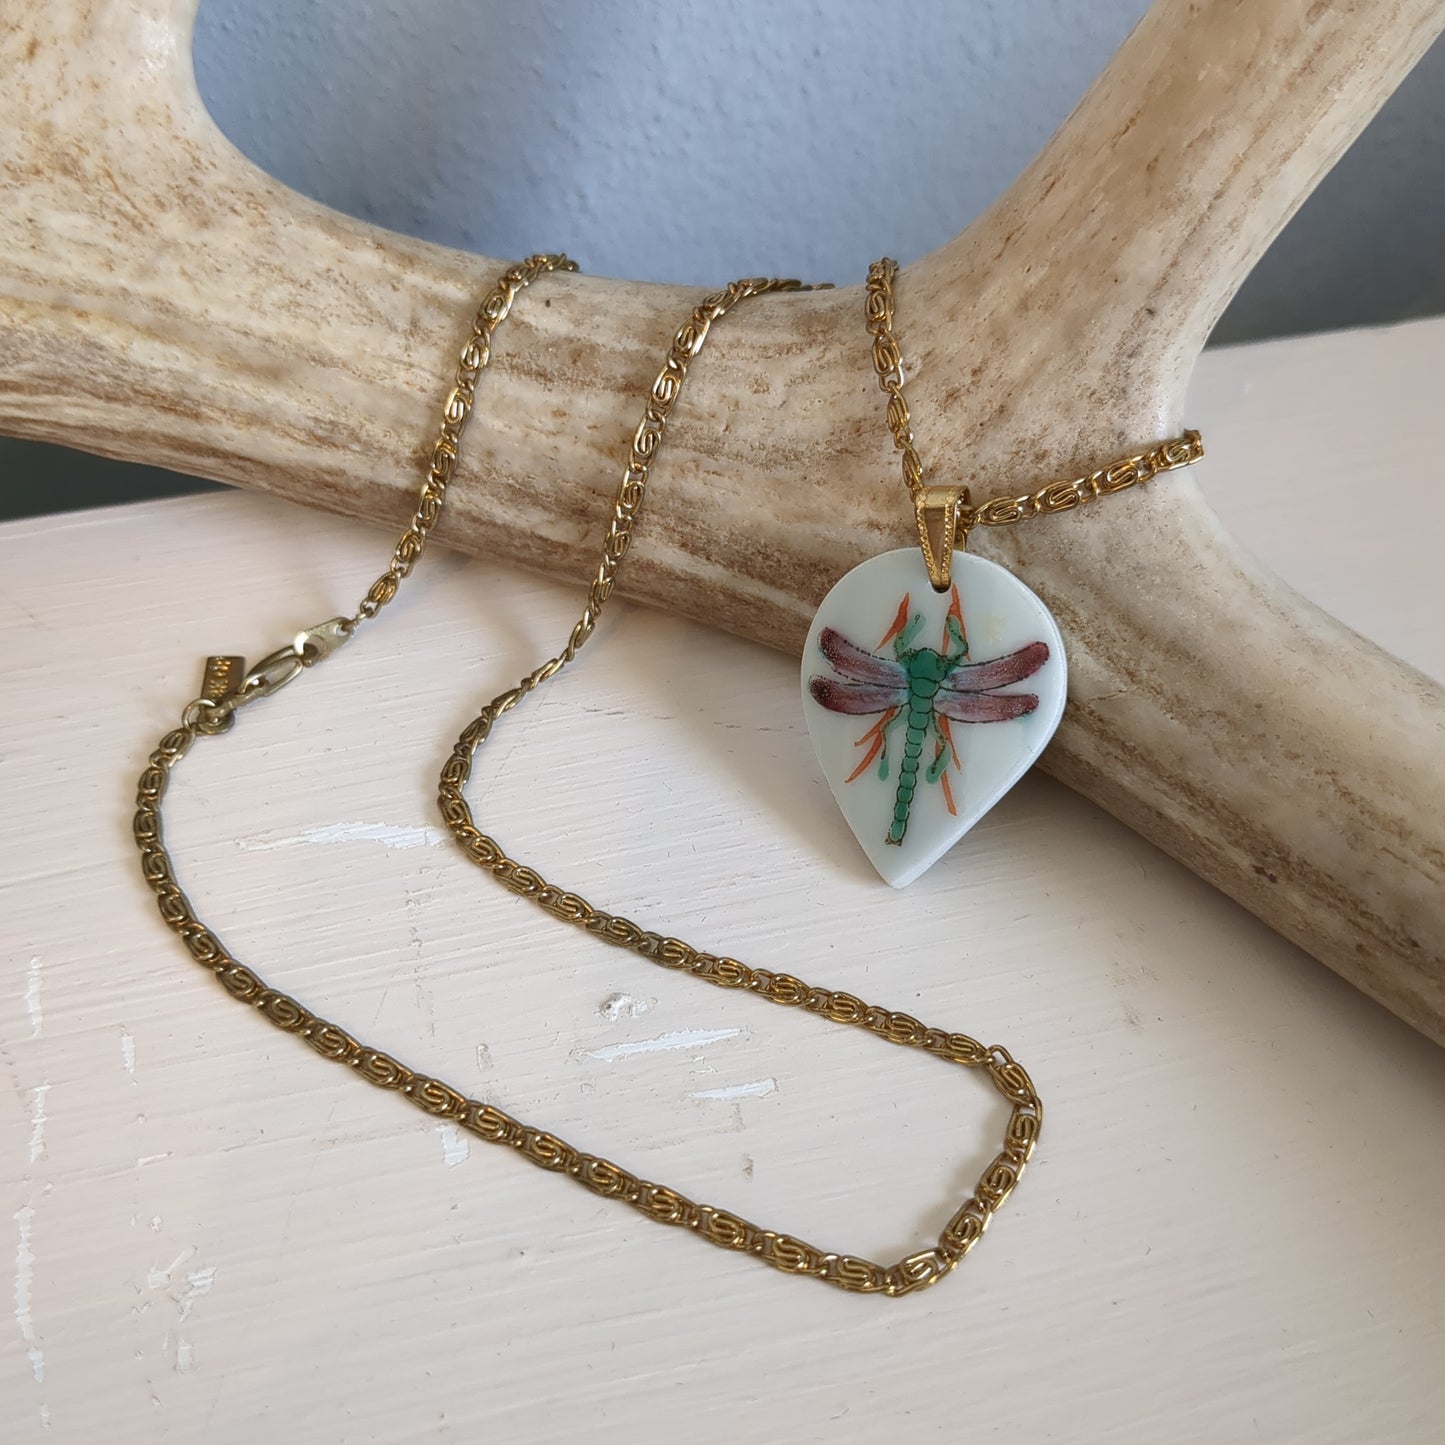 Vintage look dragonfly necklace